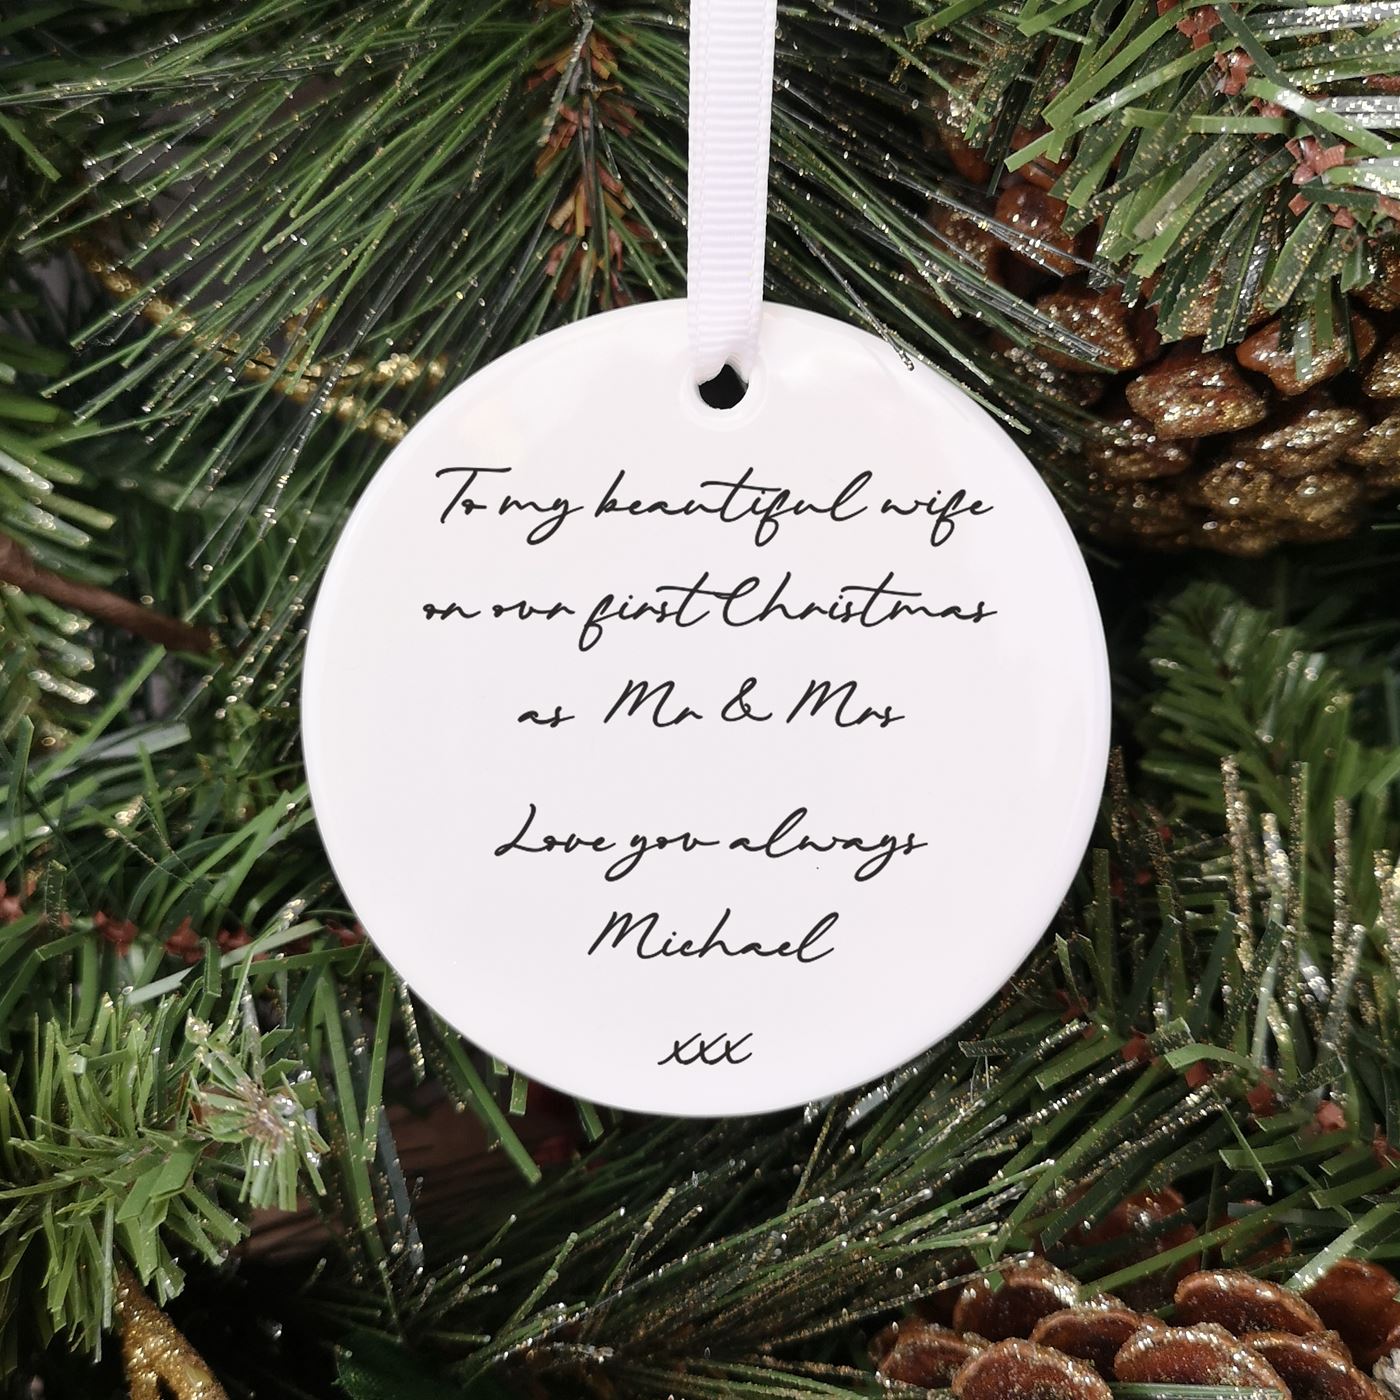 Personalised Ceramic First Christmas Married Bauble - Stars